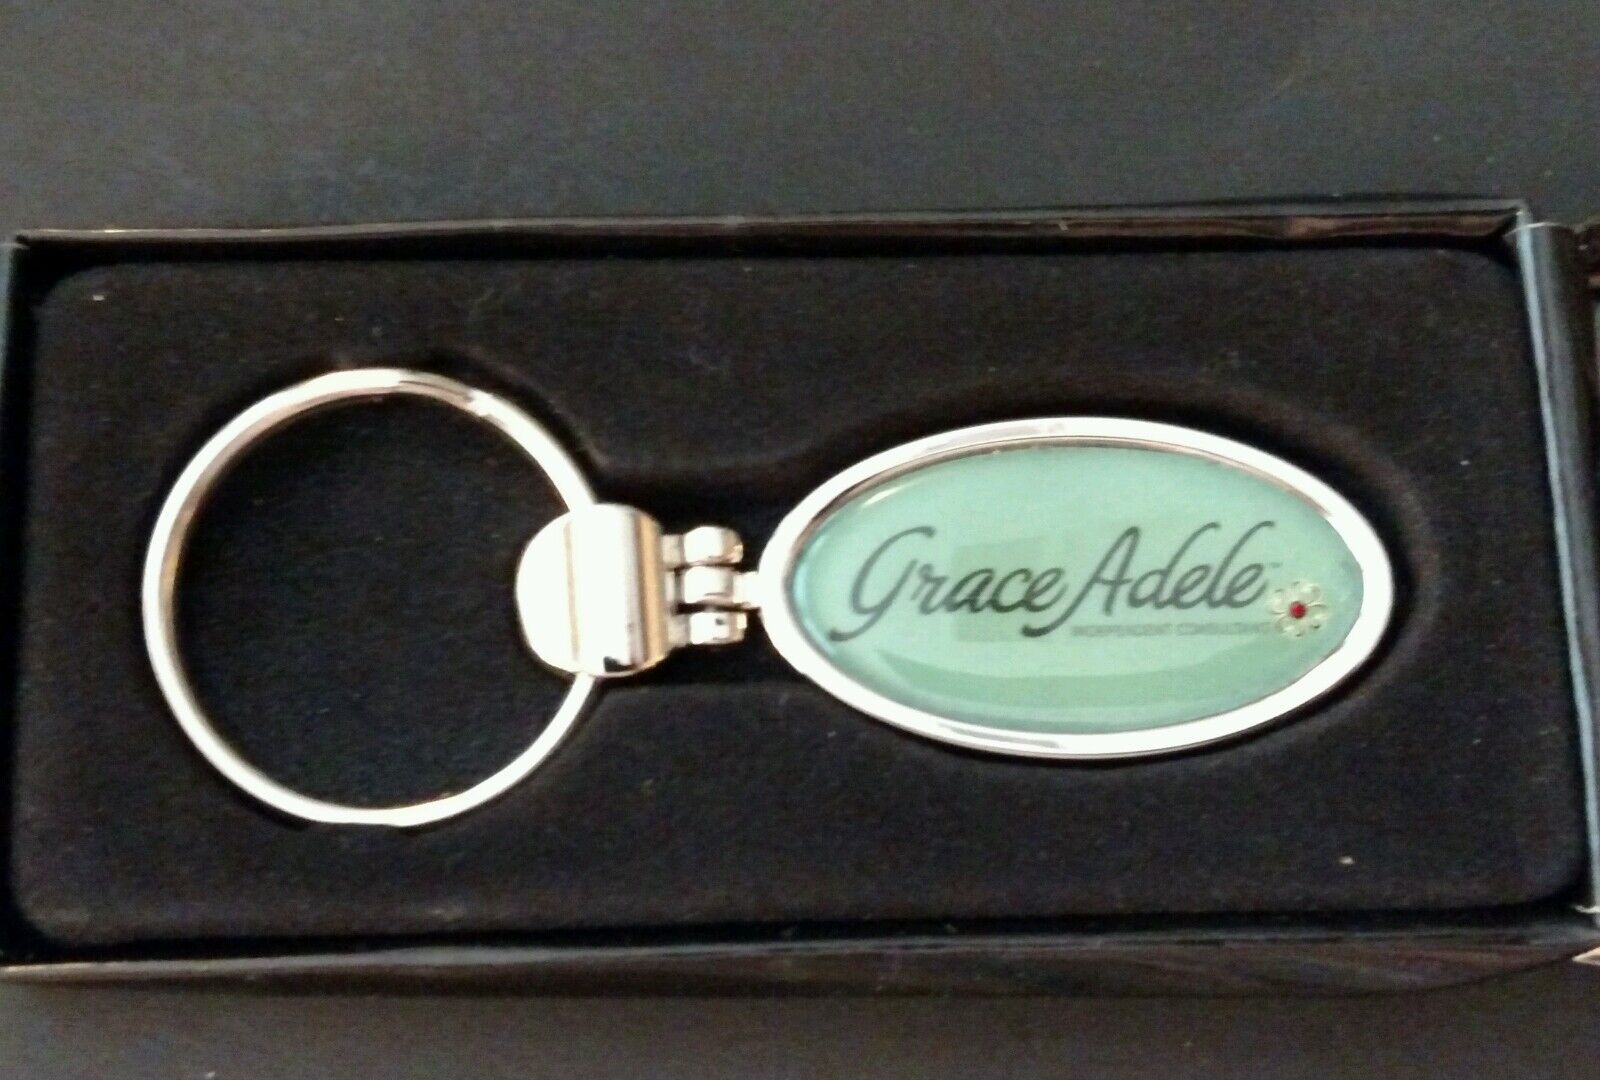 Grace Adele Logo Keychain Independent Consultant - Silver Tone Metal